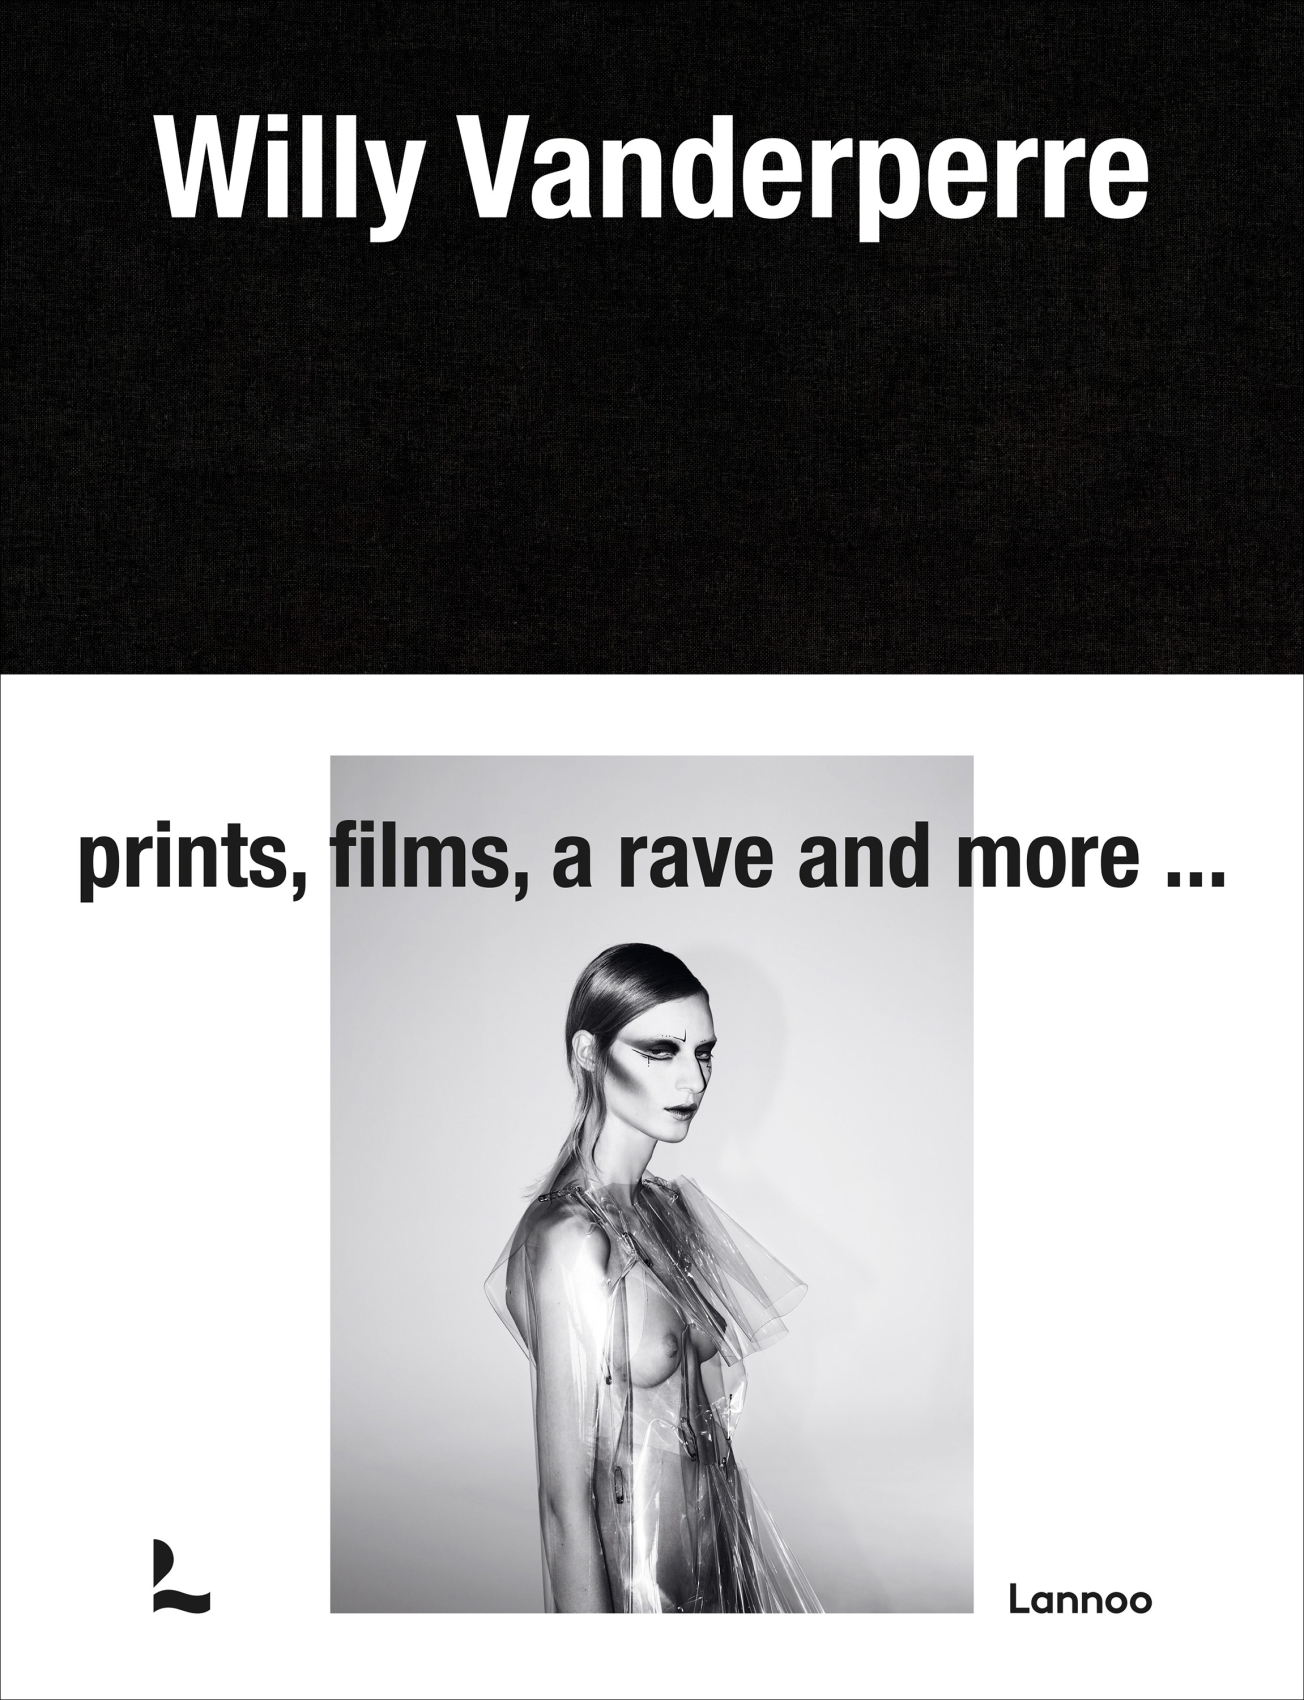 Willy Vanderperre: Prints, films, a rave and more...